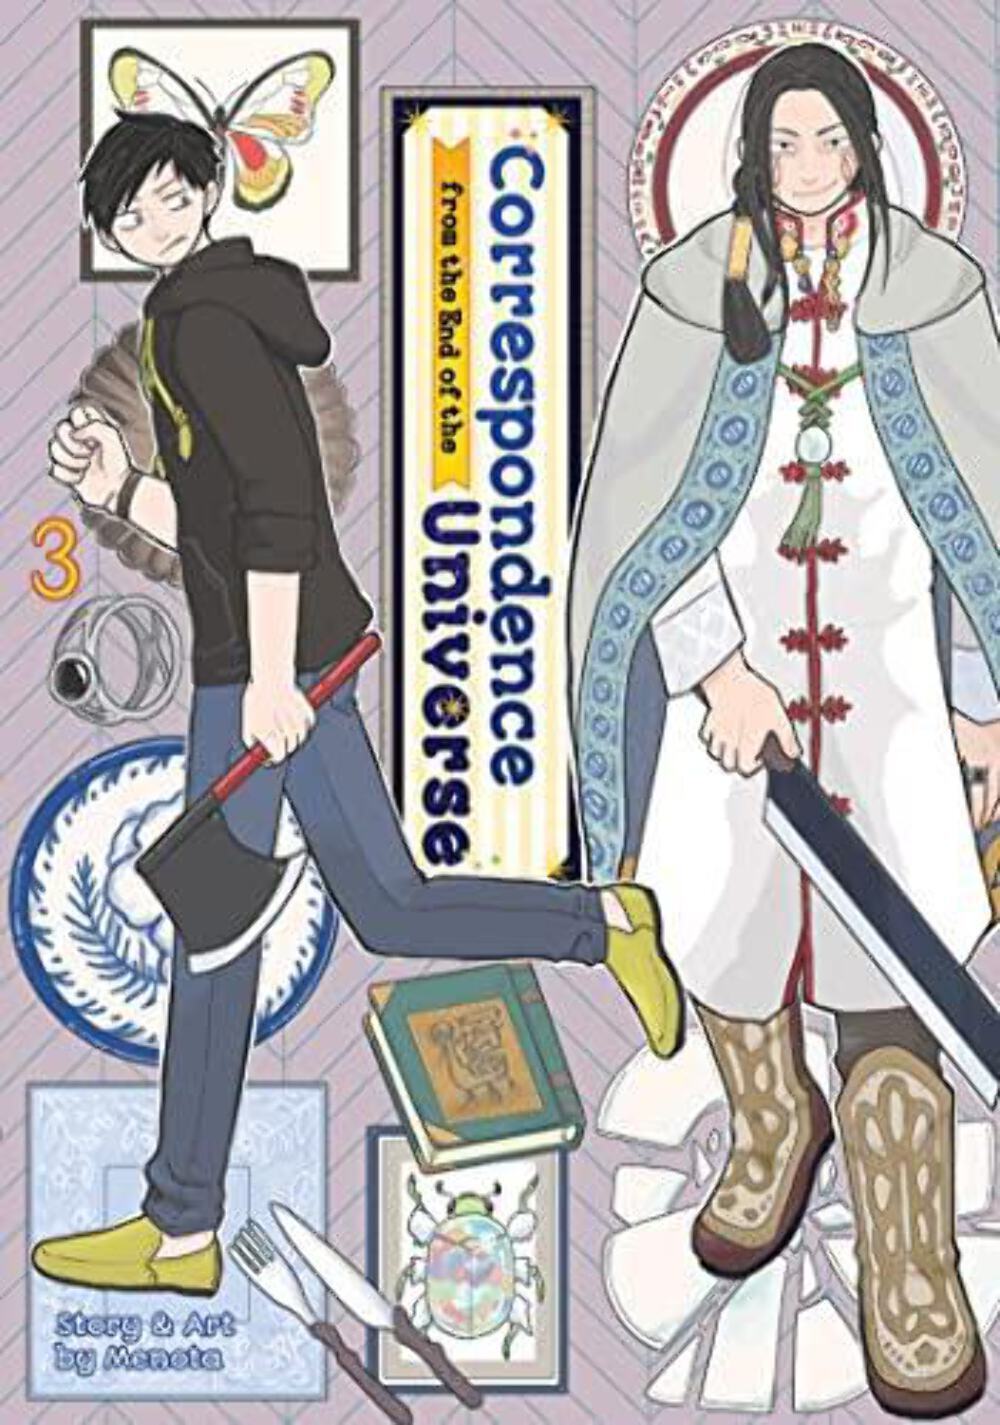 Correspondence from the Edge of the Universe Vol 3 Used English Manga Graphic No